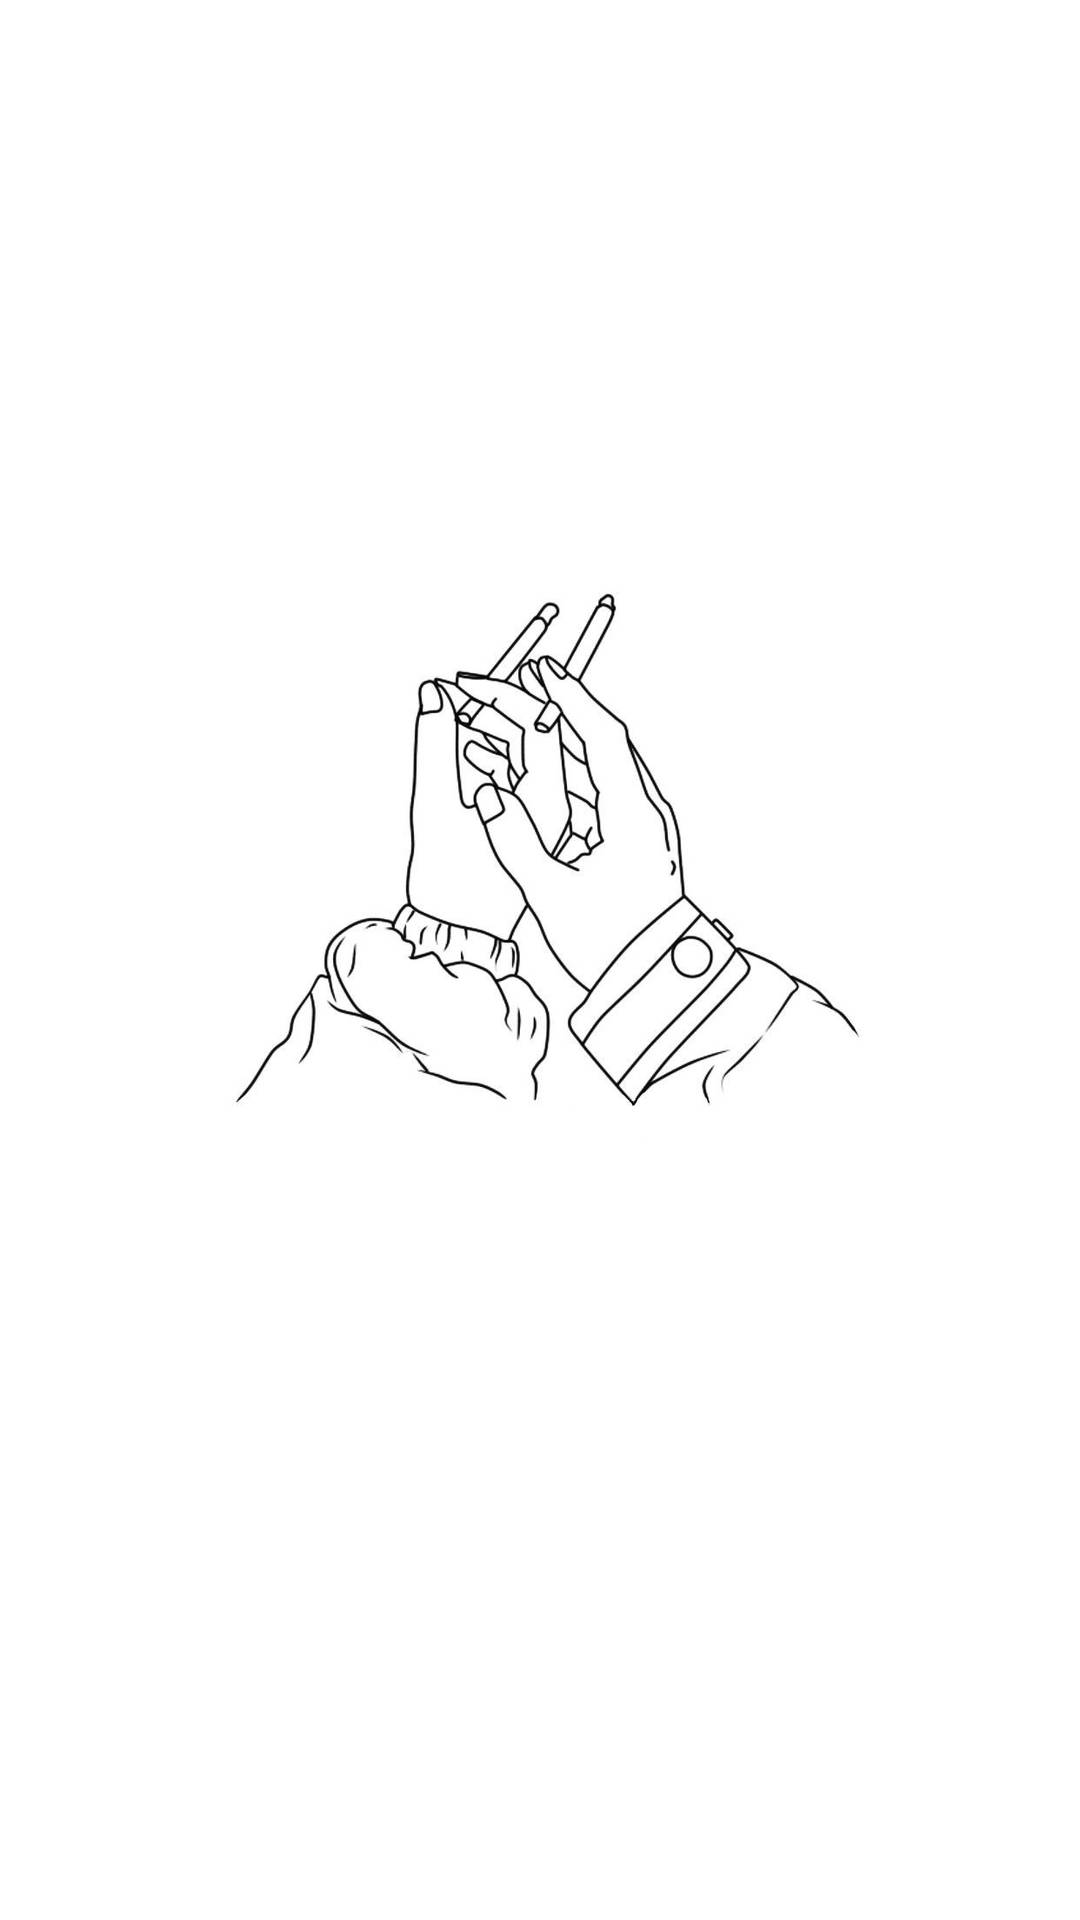 Aesthetic Drawing Of Hands With Cigarettes